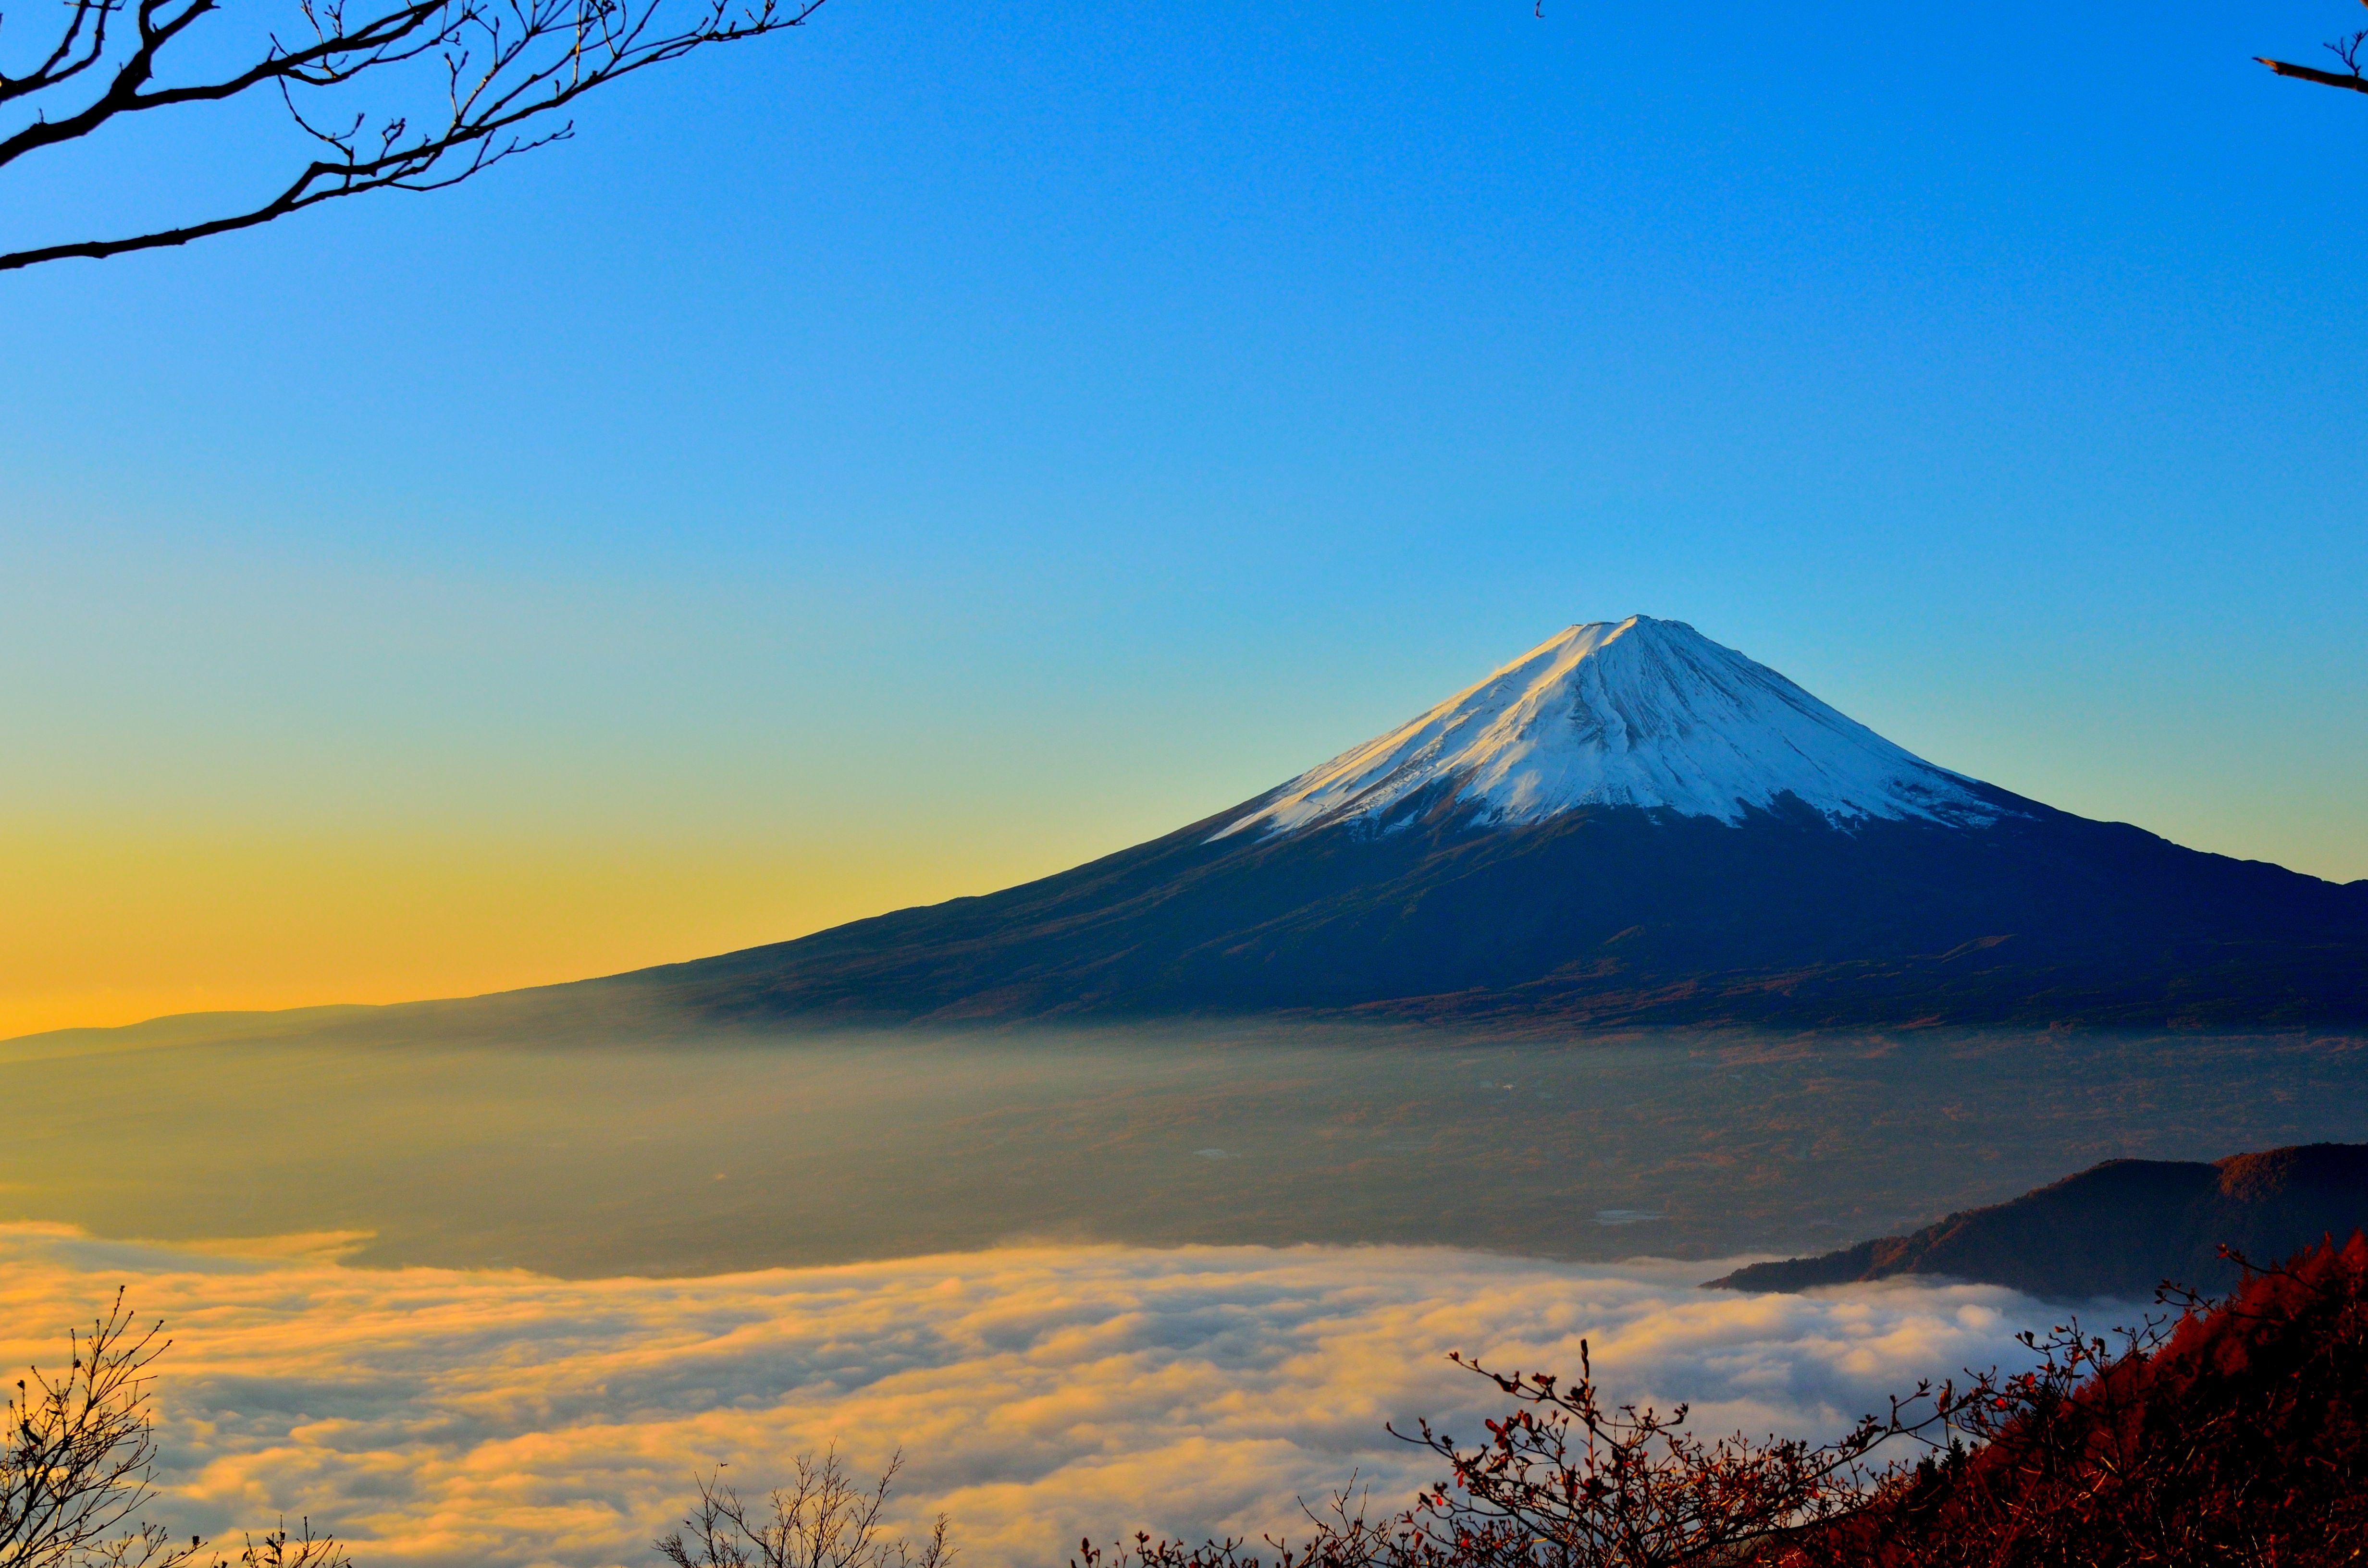 Landscape with clouds and Mount Fuji, Japan image - Free ...